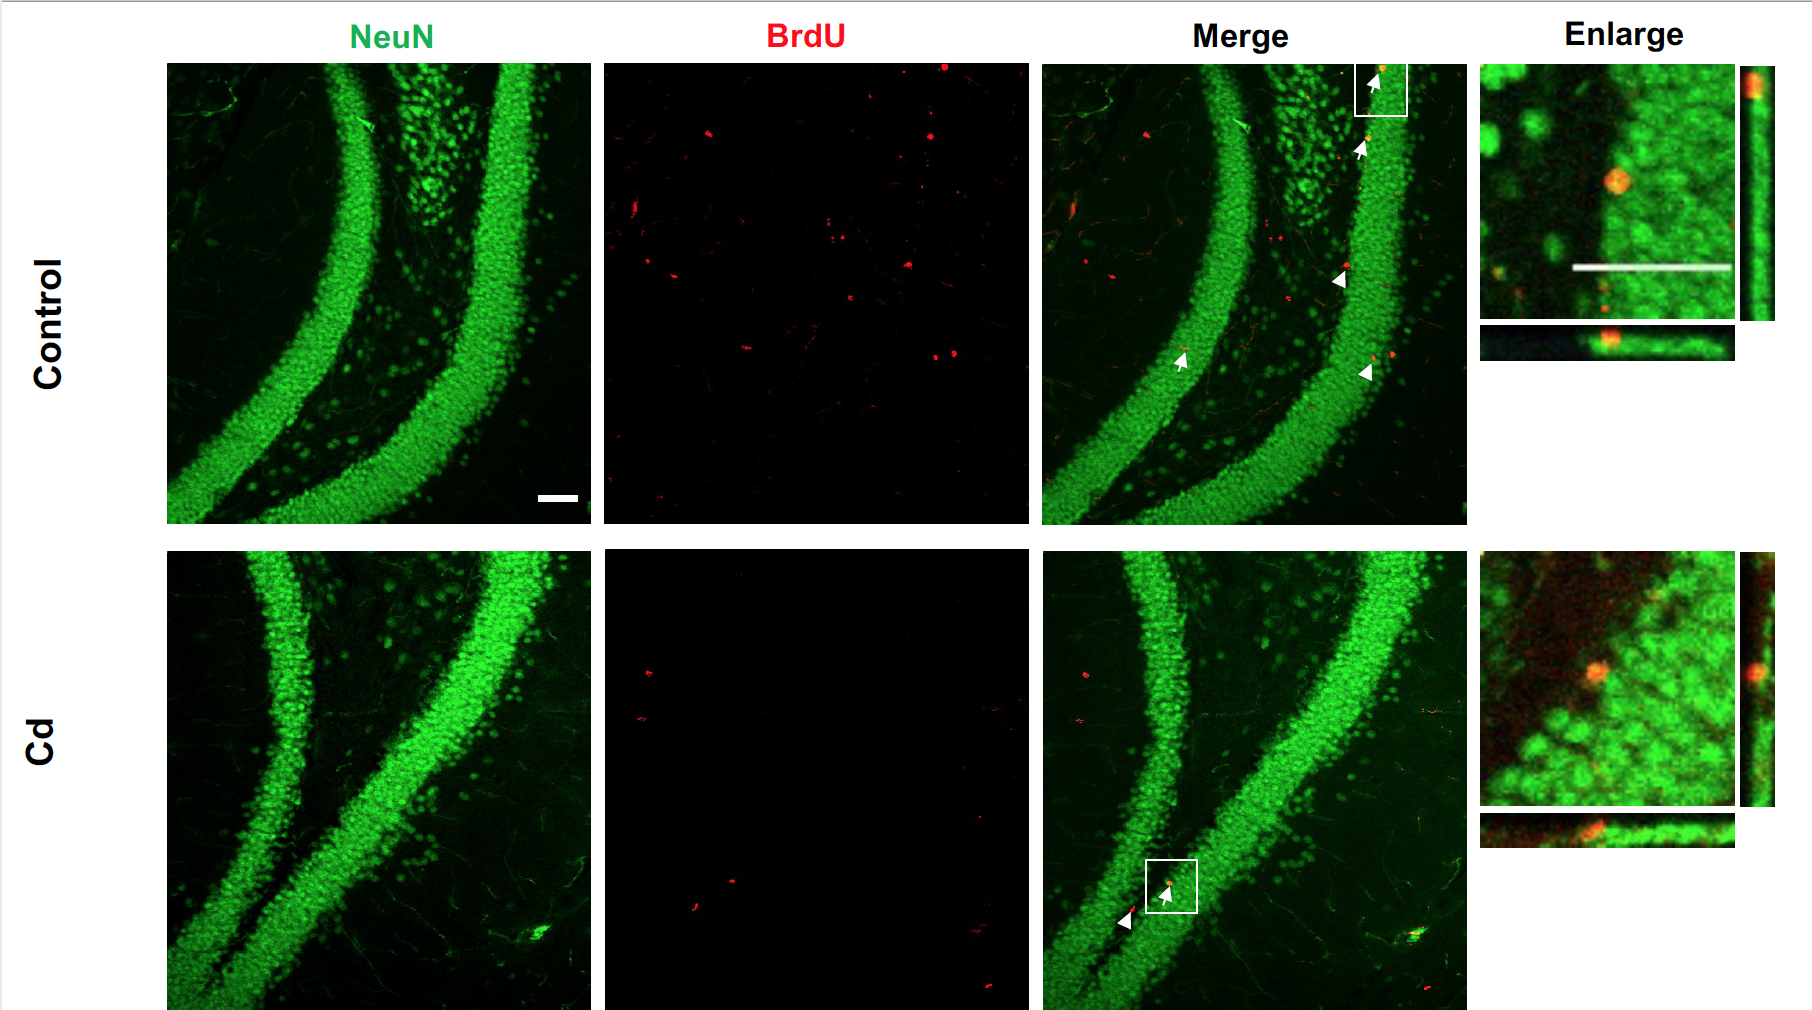 Images of slices of brain tissue with mature neurons fluorescing green and brand new cells fluorescing red. 